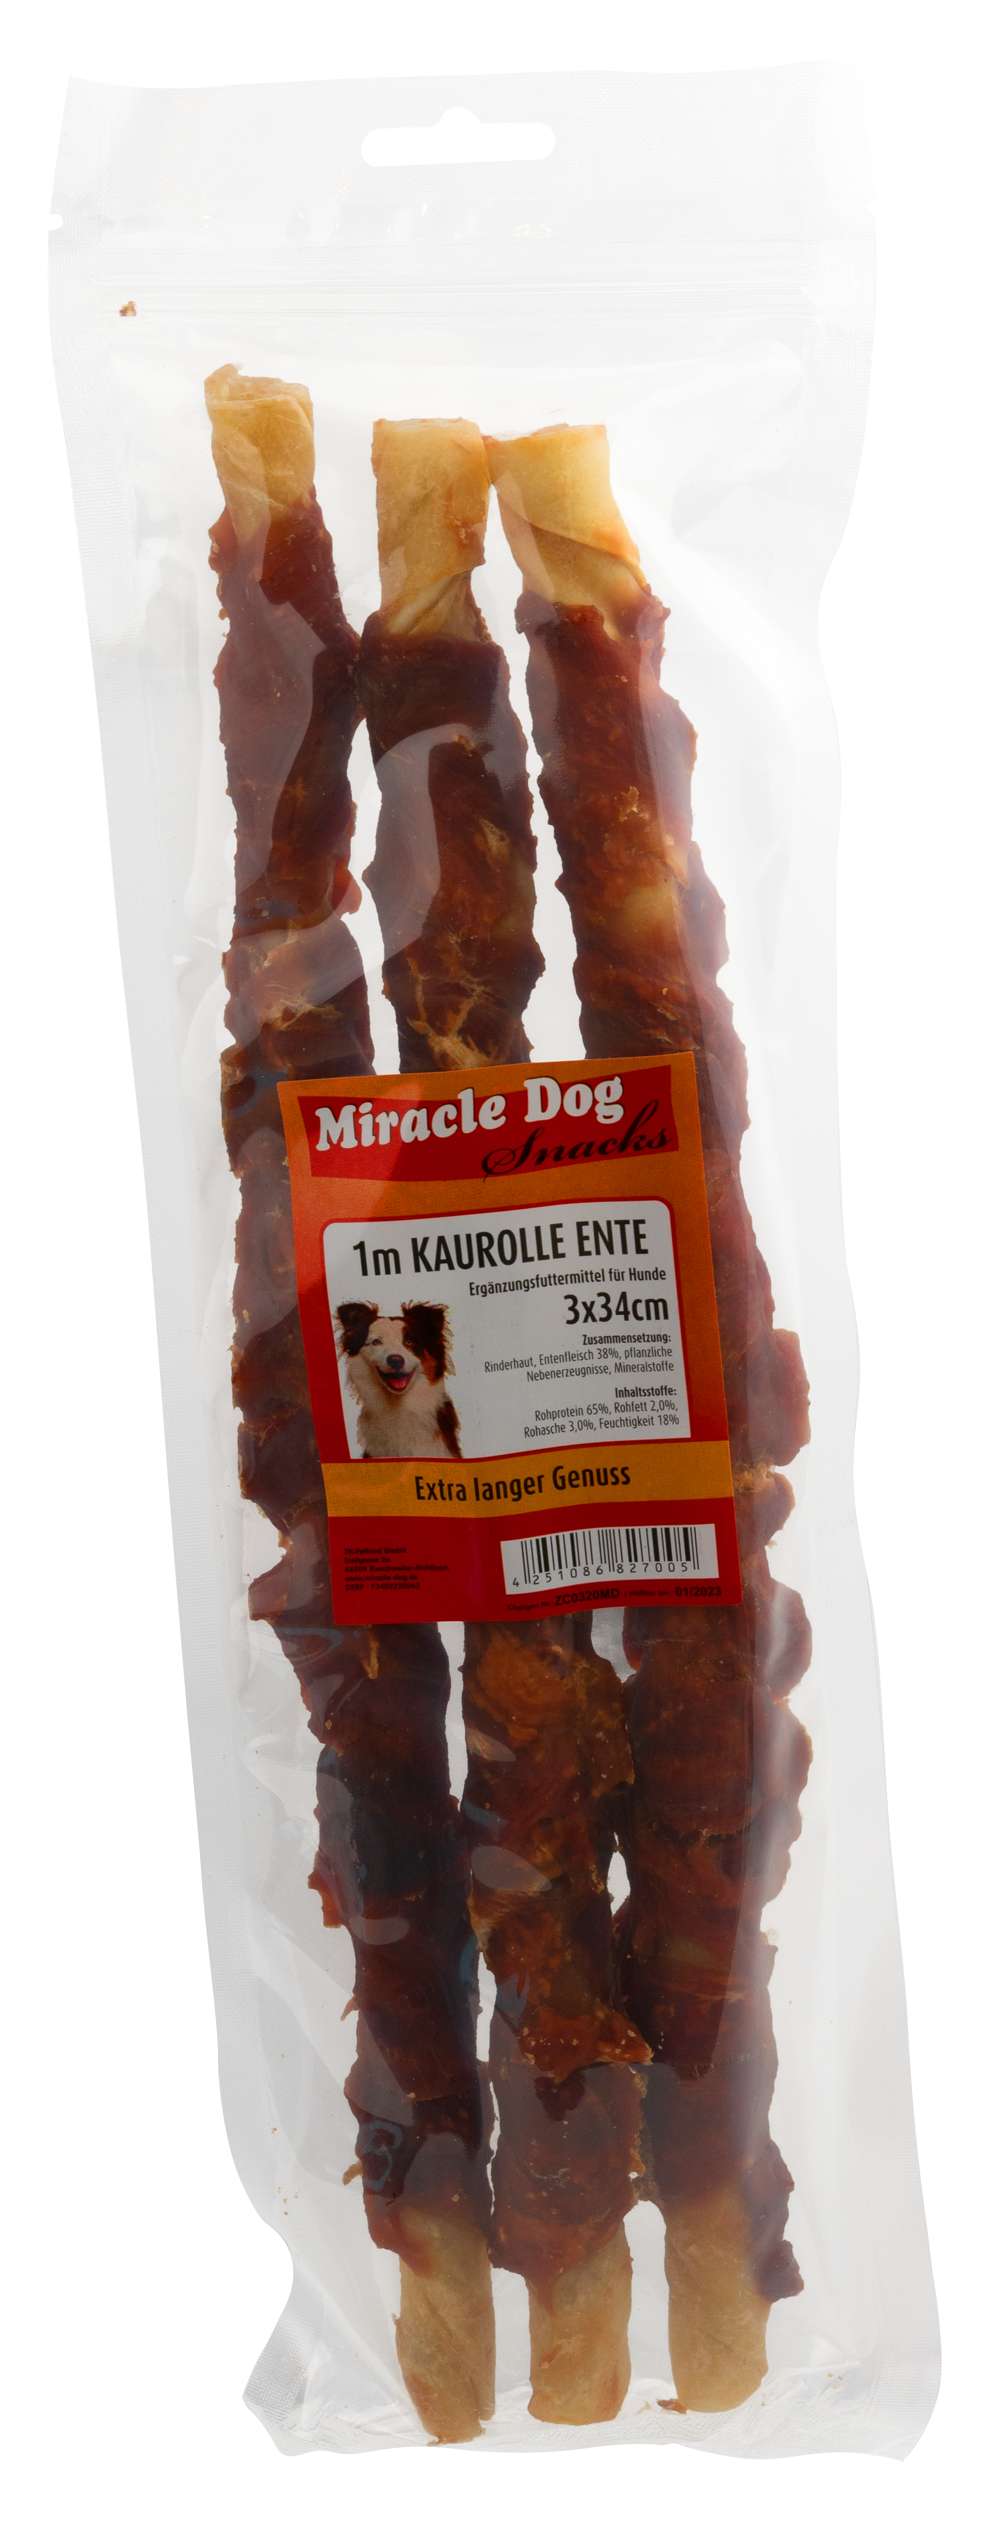 Miracle Dog 1m Kaurolle